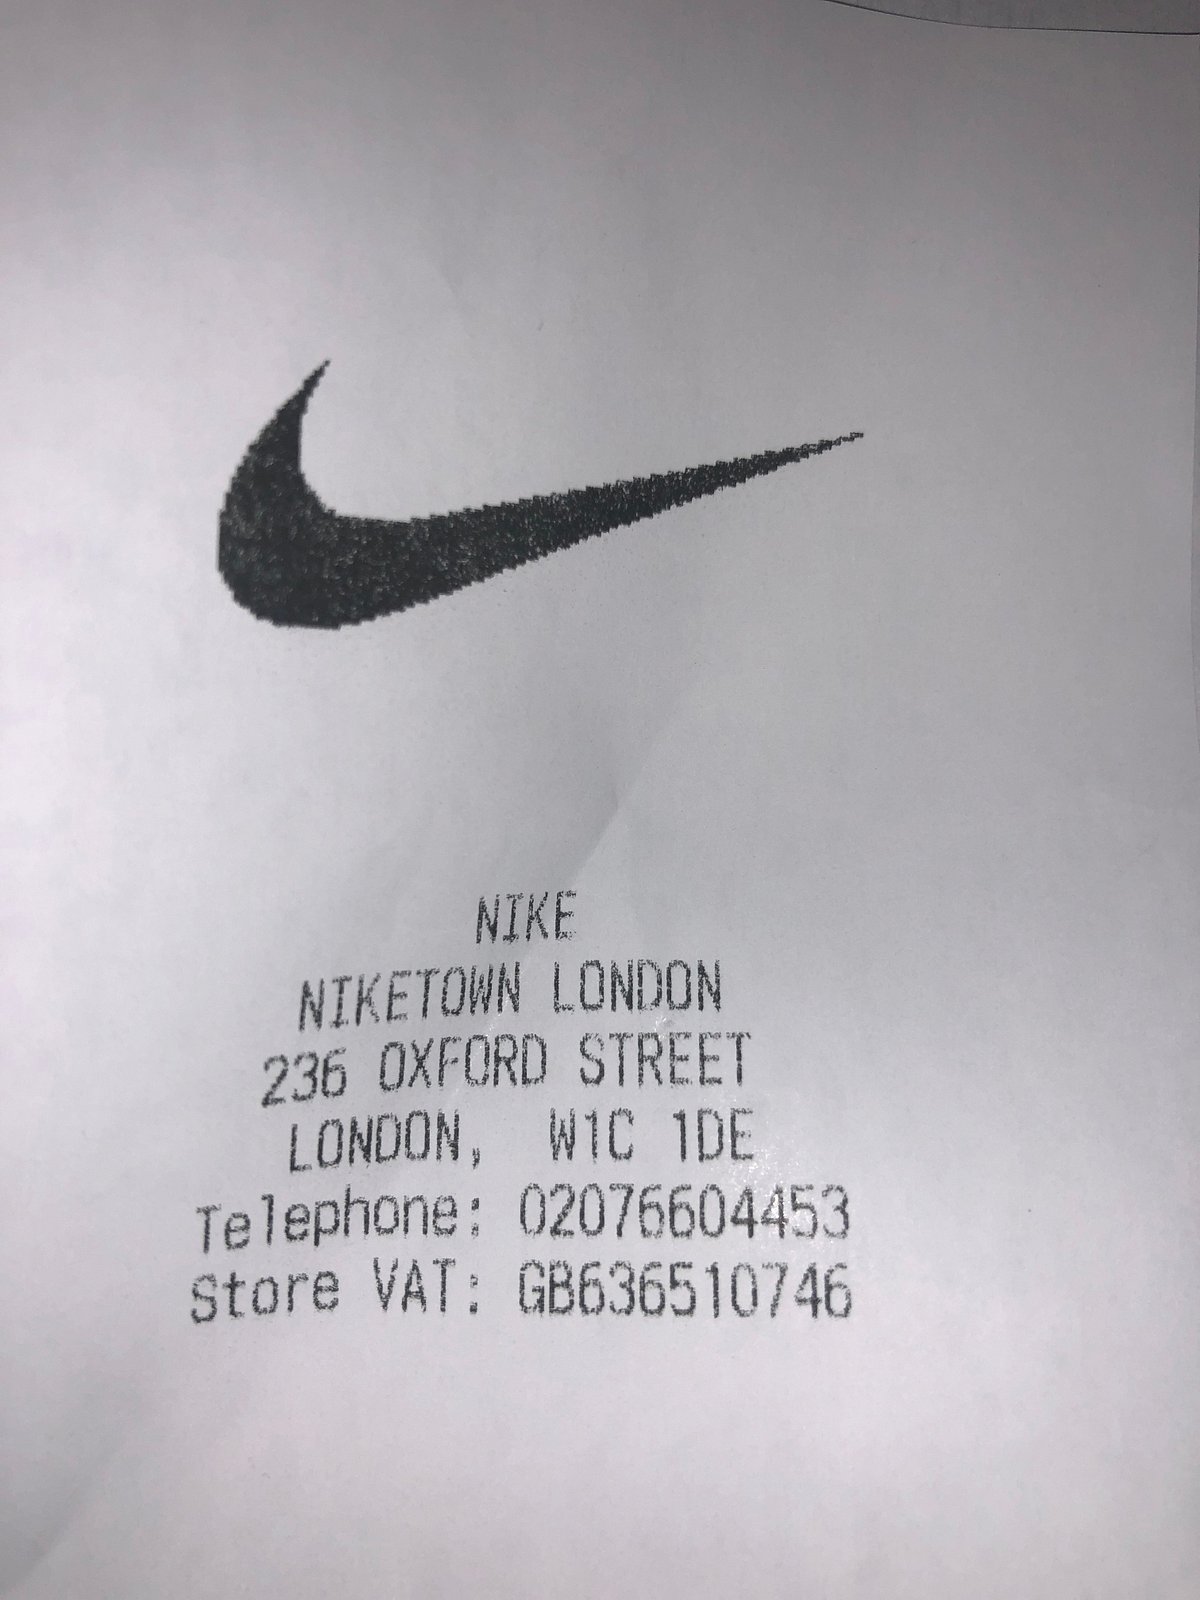 NikeTown London - All You Need to Know BEFORE You Go